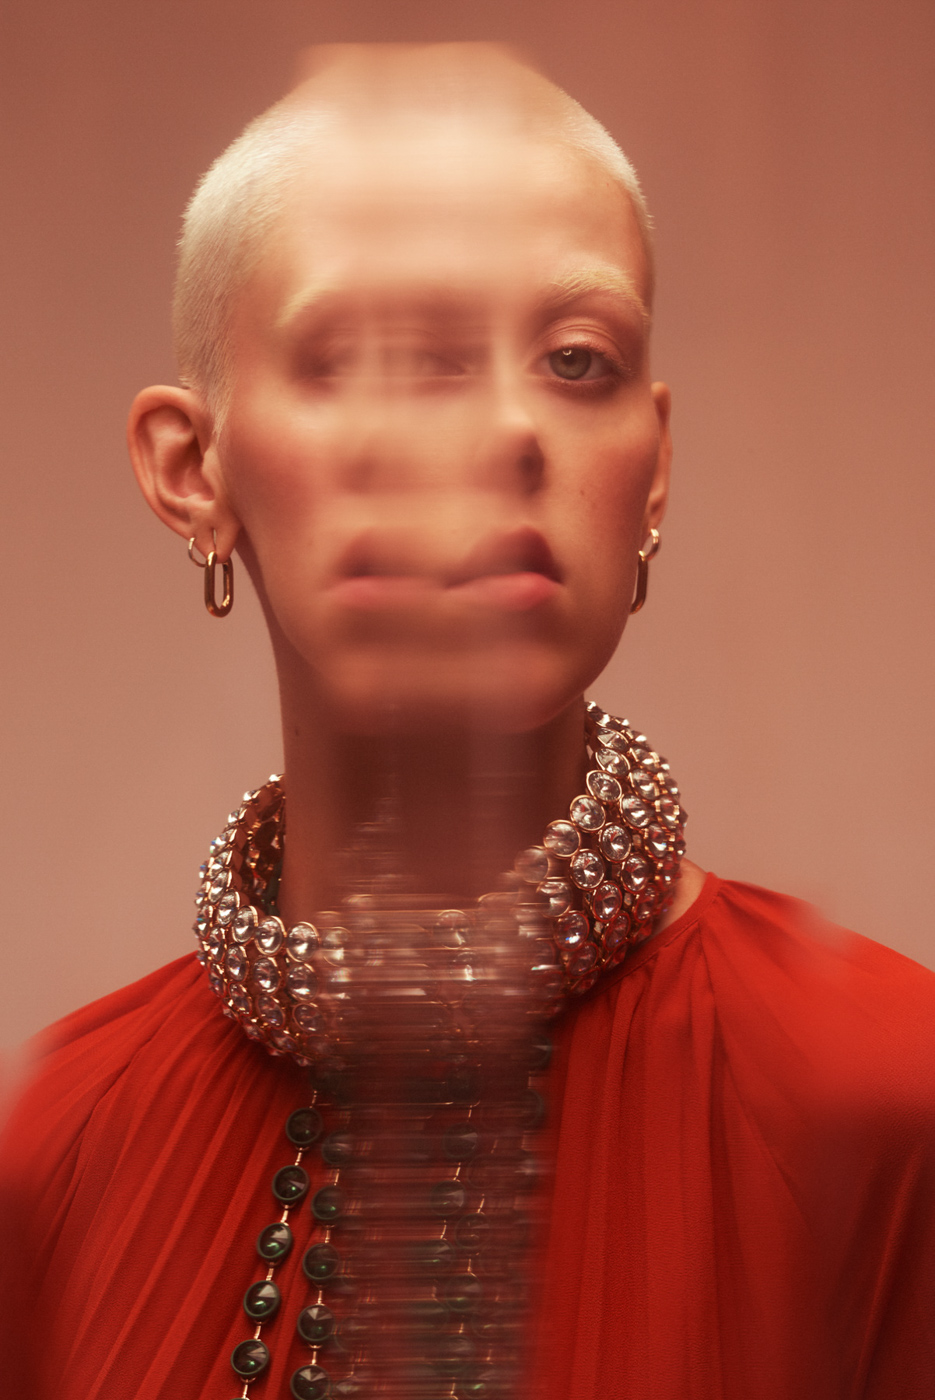 Distorted_face_of_short_haired_blond_woman_wearing_diamond_choker_on_orange_background_photographed_by_Sara_Lehtomaa